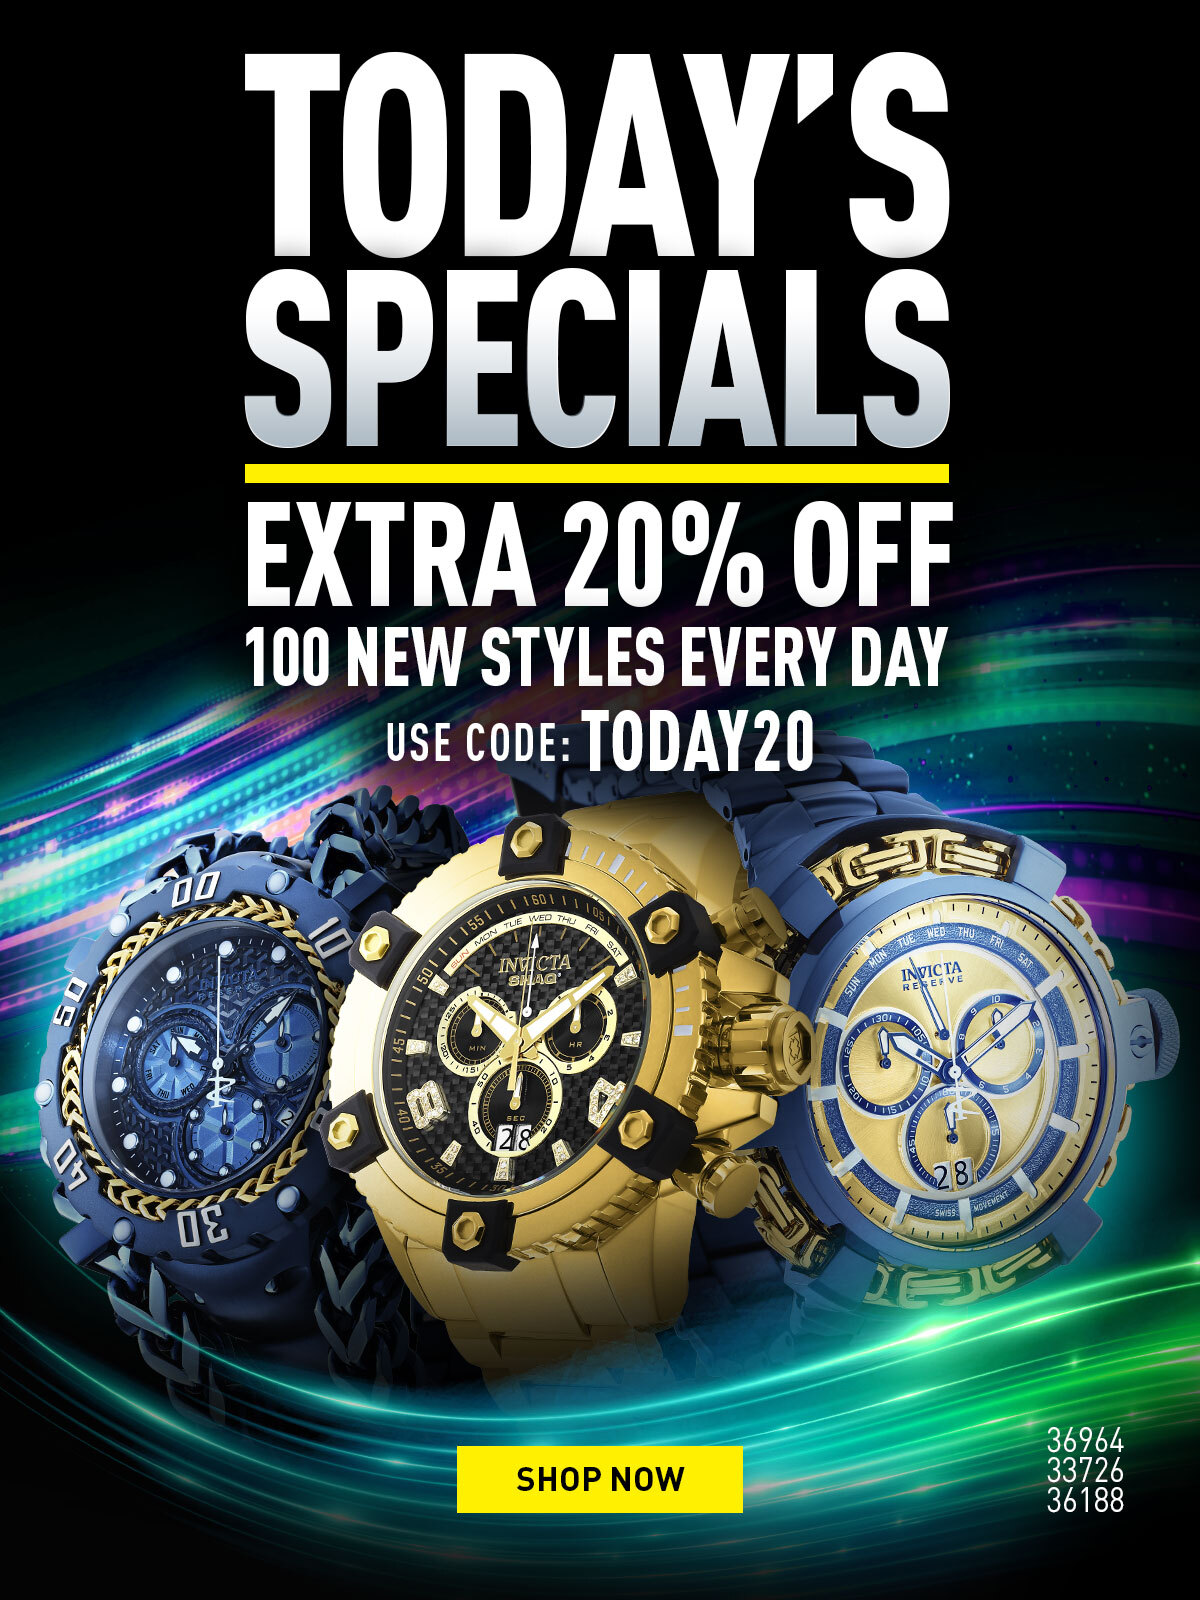 Today's special. Extra 20% off 100 styles every 24 hours. Use code: Today20!